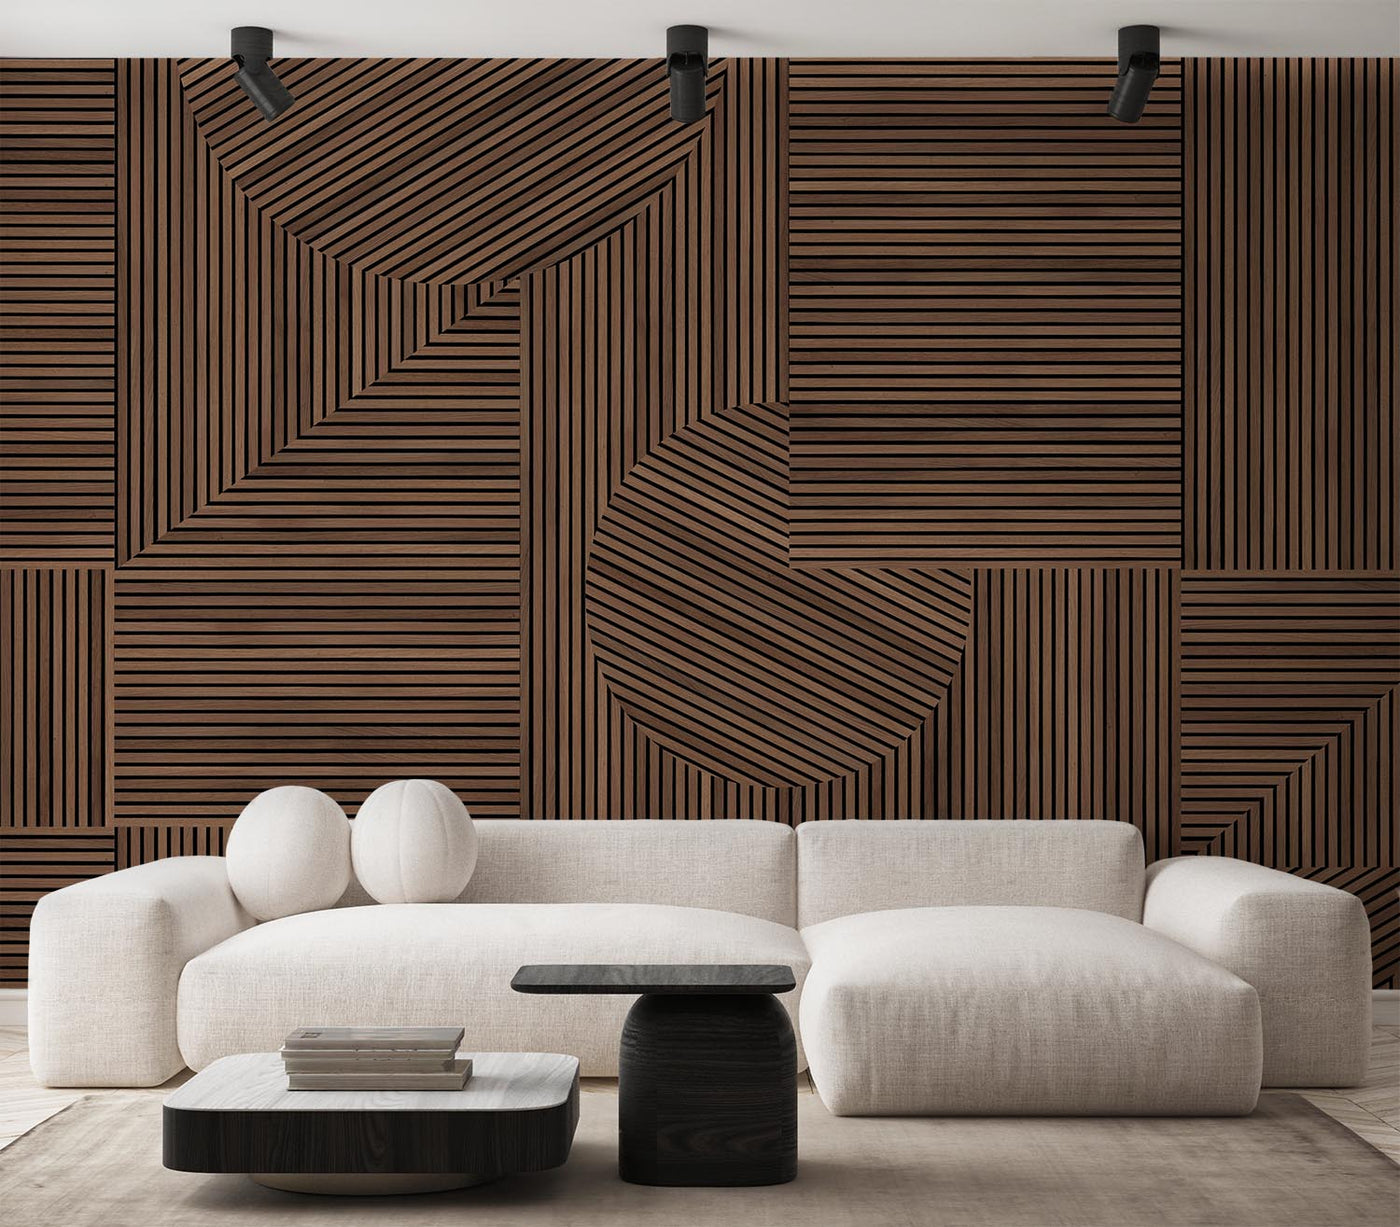 Wooden Wall Wallpapers